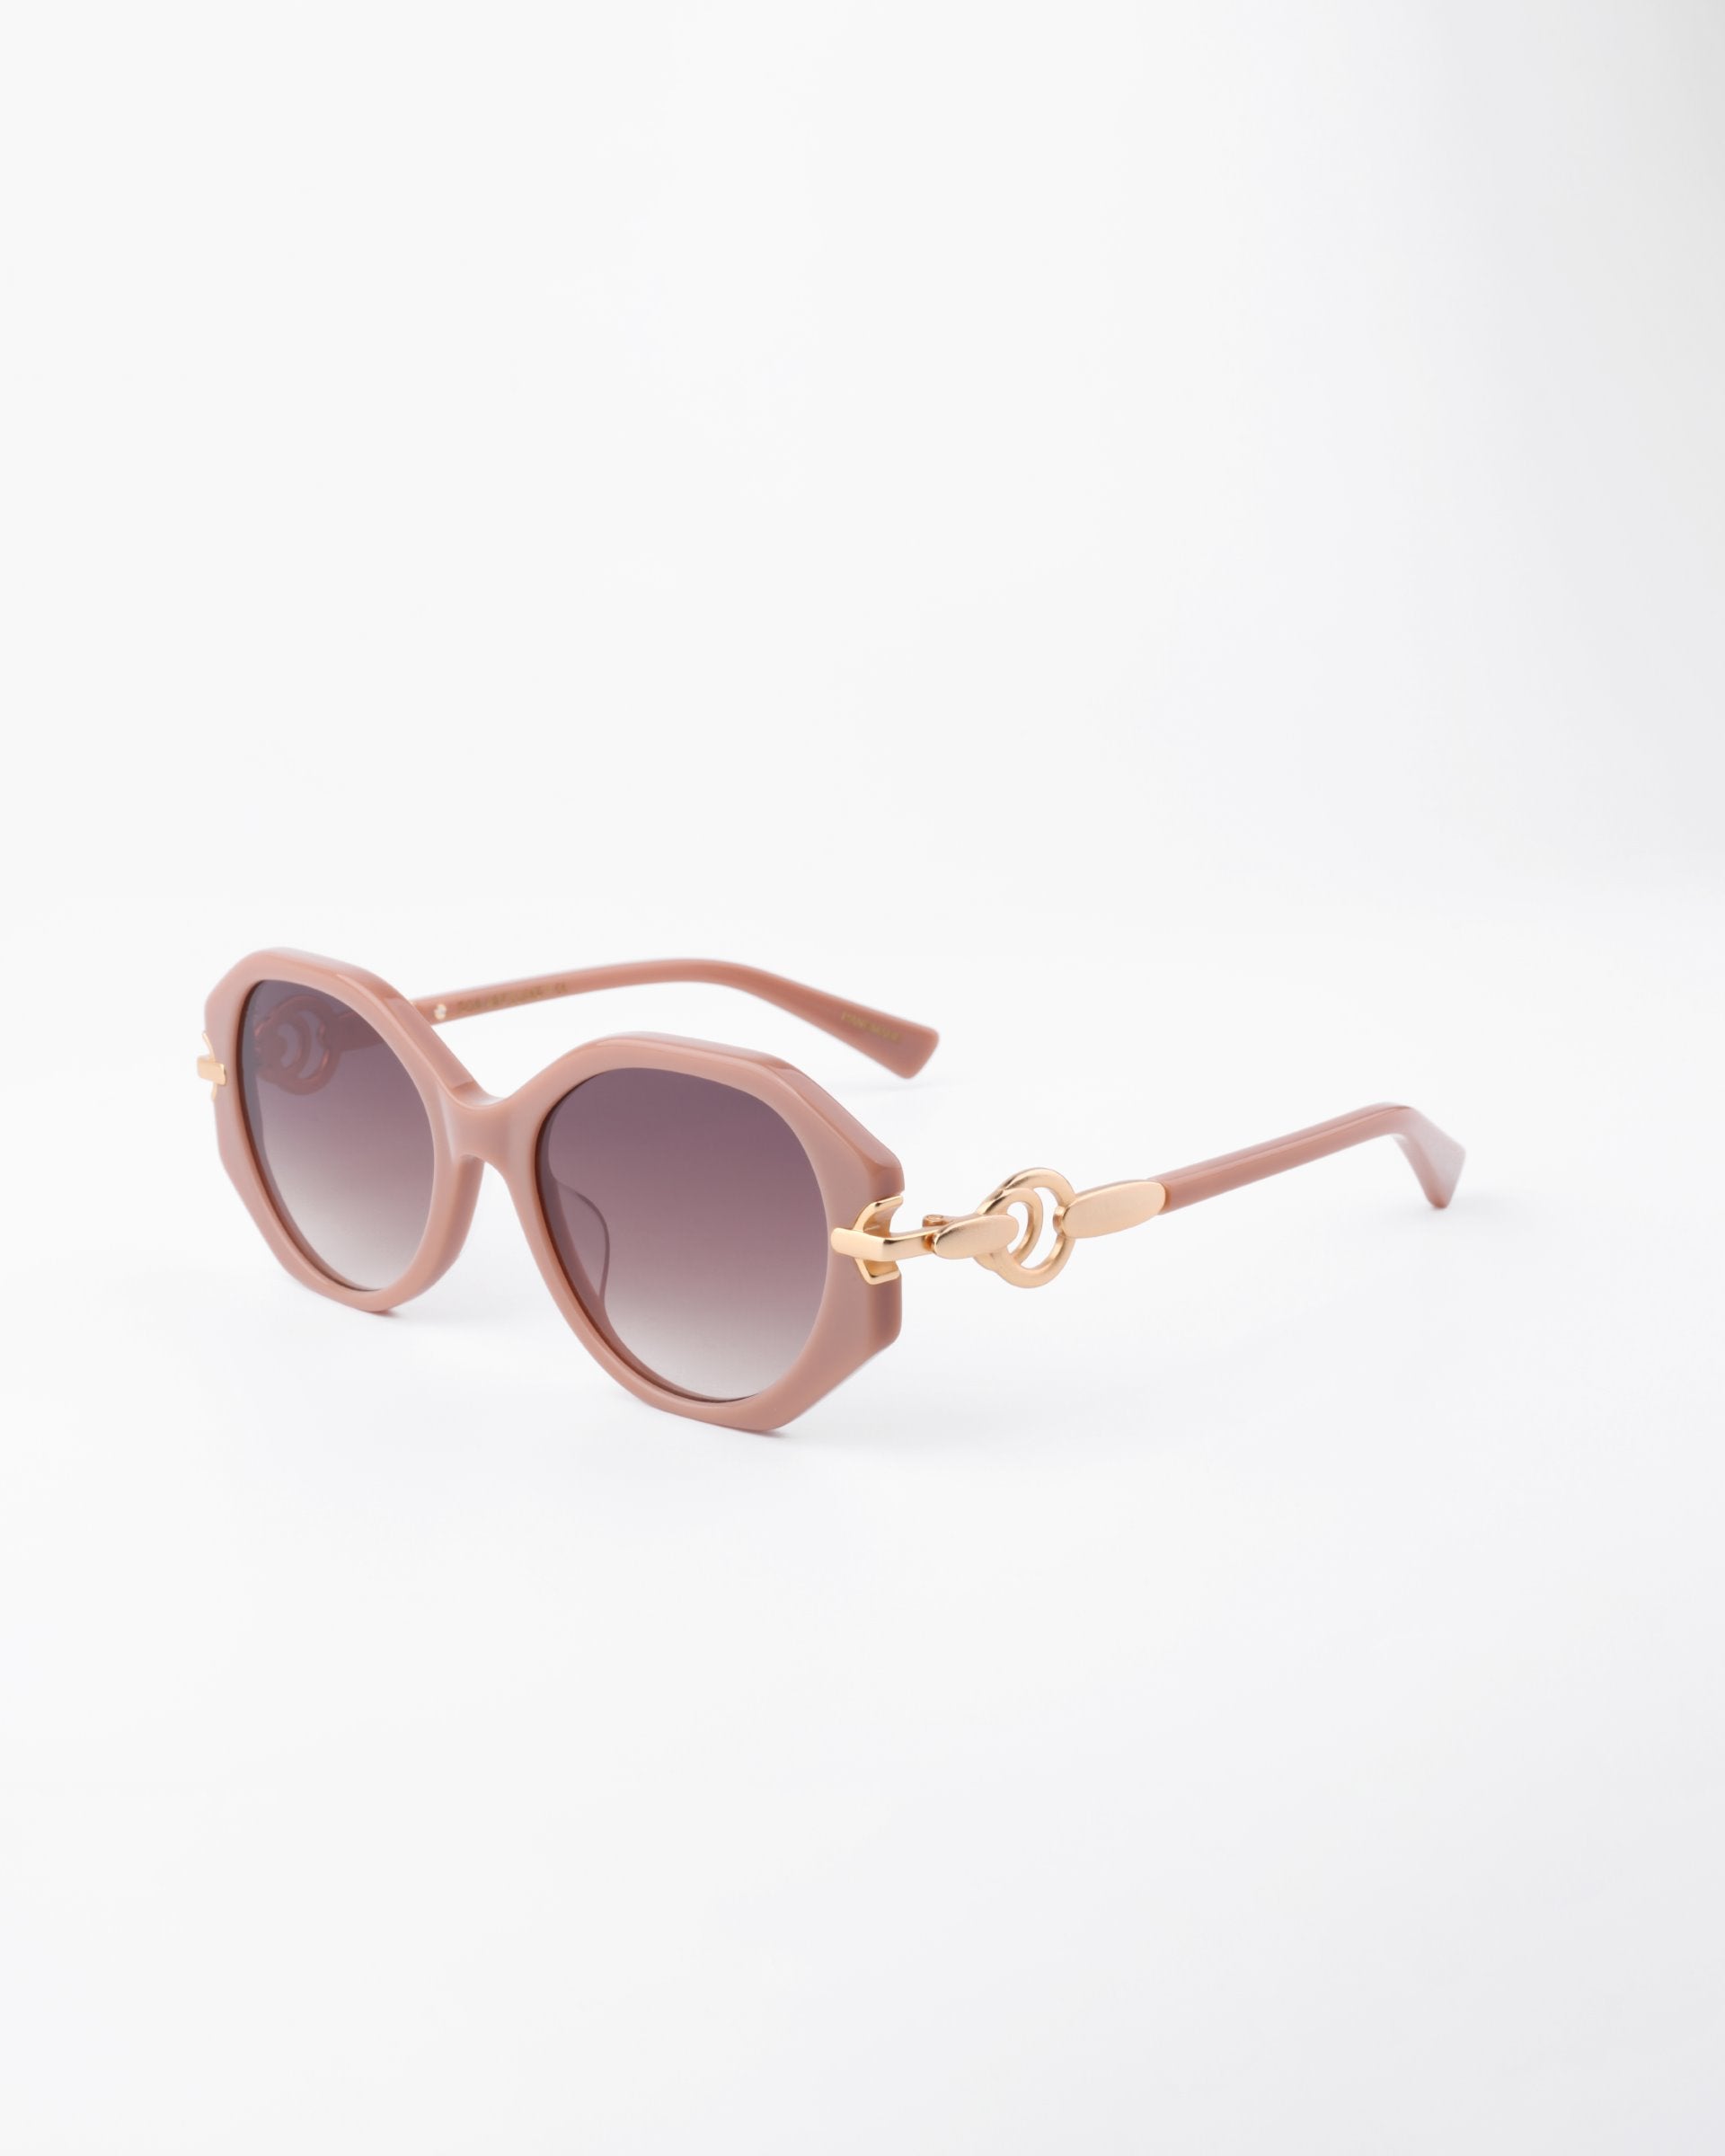 A pair of stylish round sunglasses with light pink, handmade acetate frames and gradient dark, shatter-resistant lenses. The arms feature gold-plated temple detailing near the hinges, adding a touch of elegance. The background is plain white, highlighting the Seaside by For Art&#39;s Sake®.